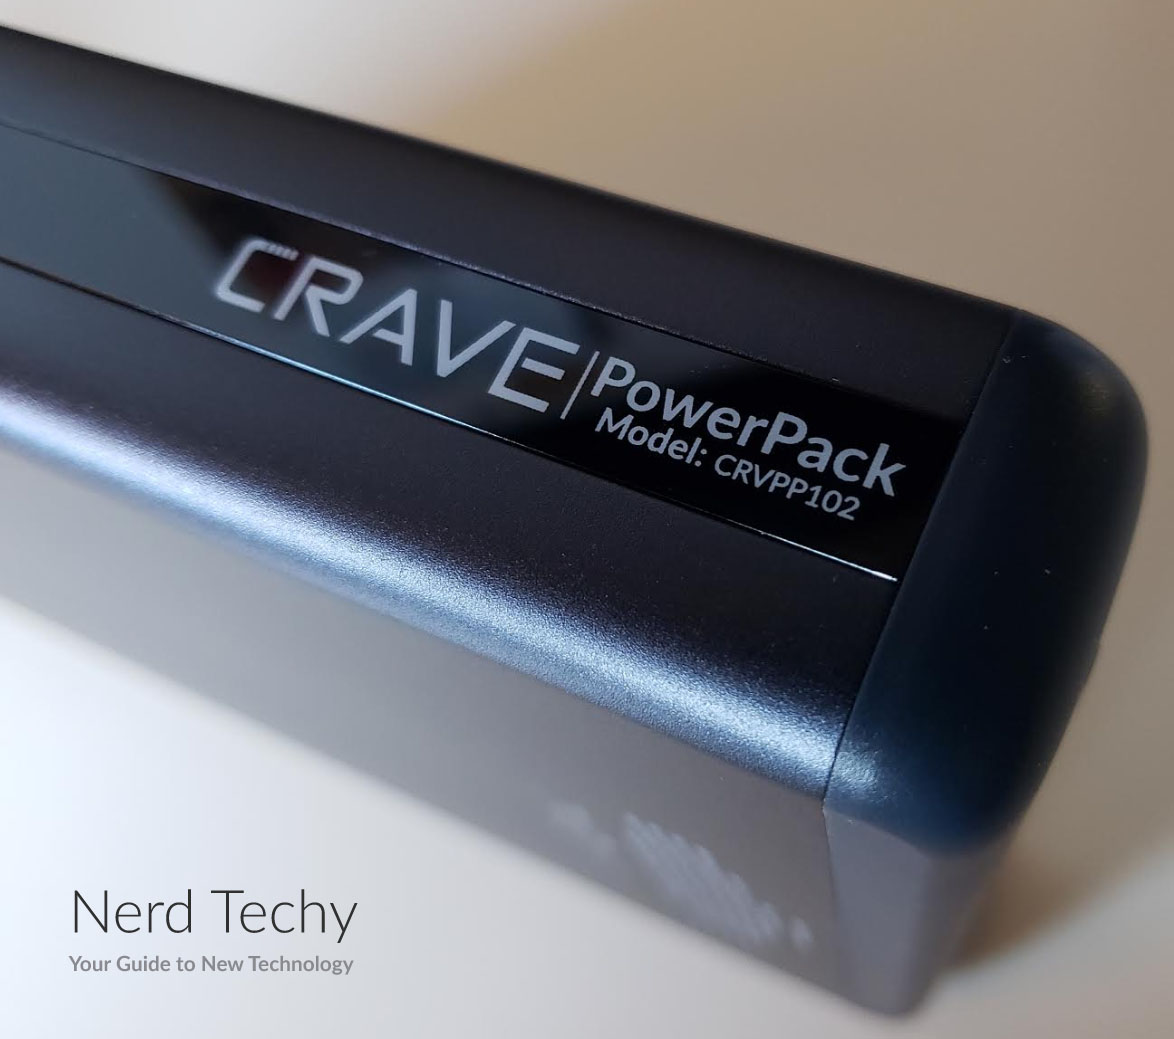 Crave PowerPack 2